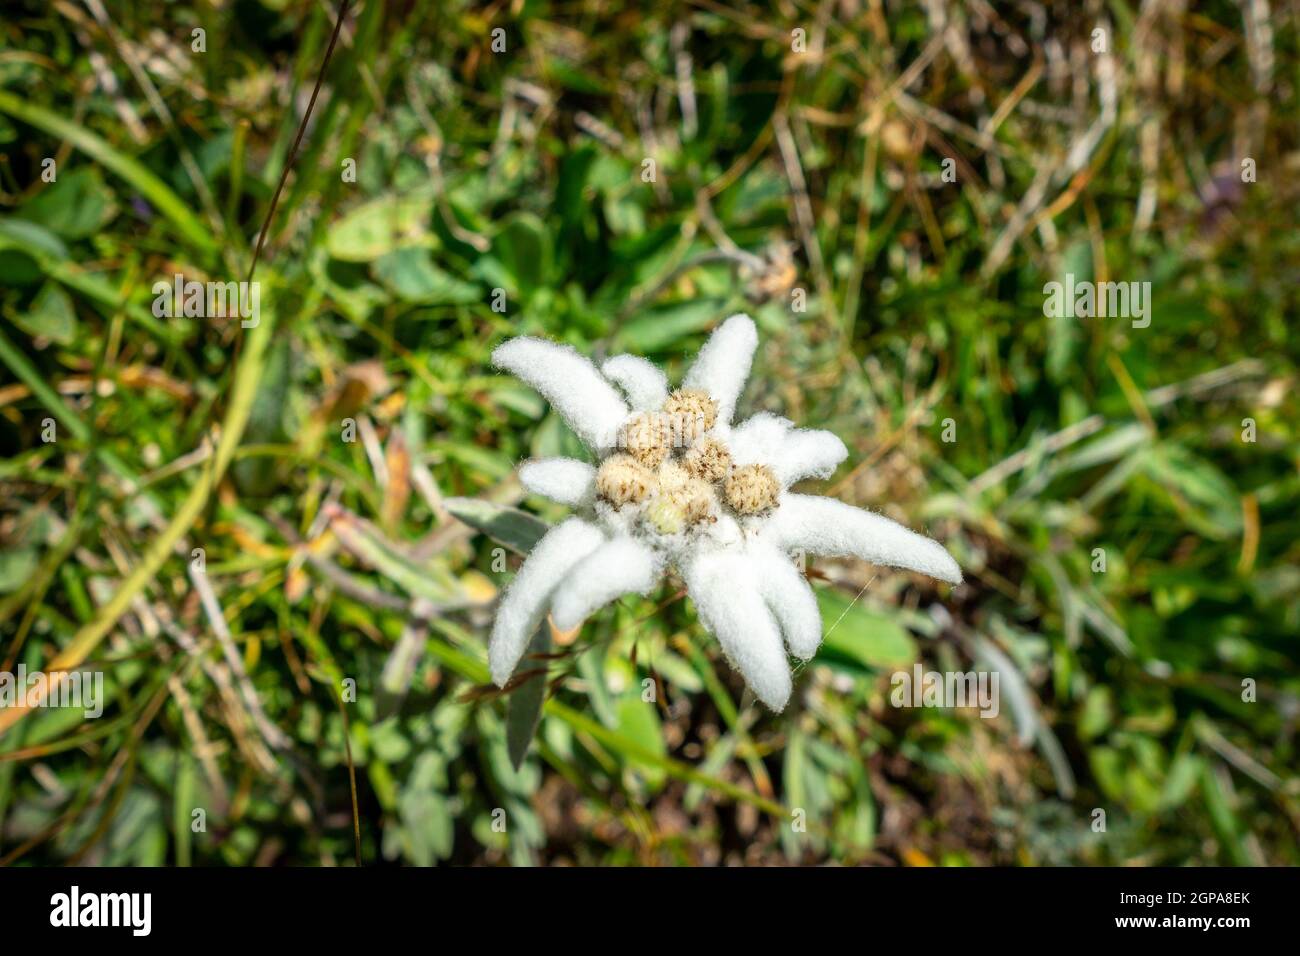 Edelweiss flowers close up view in Vanoise national Park, France Stock Photo